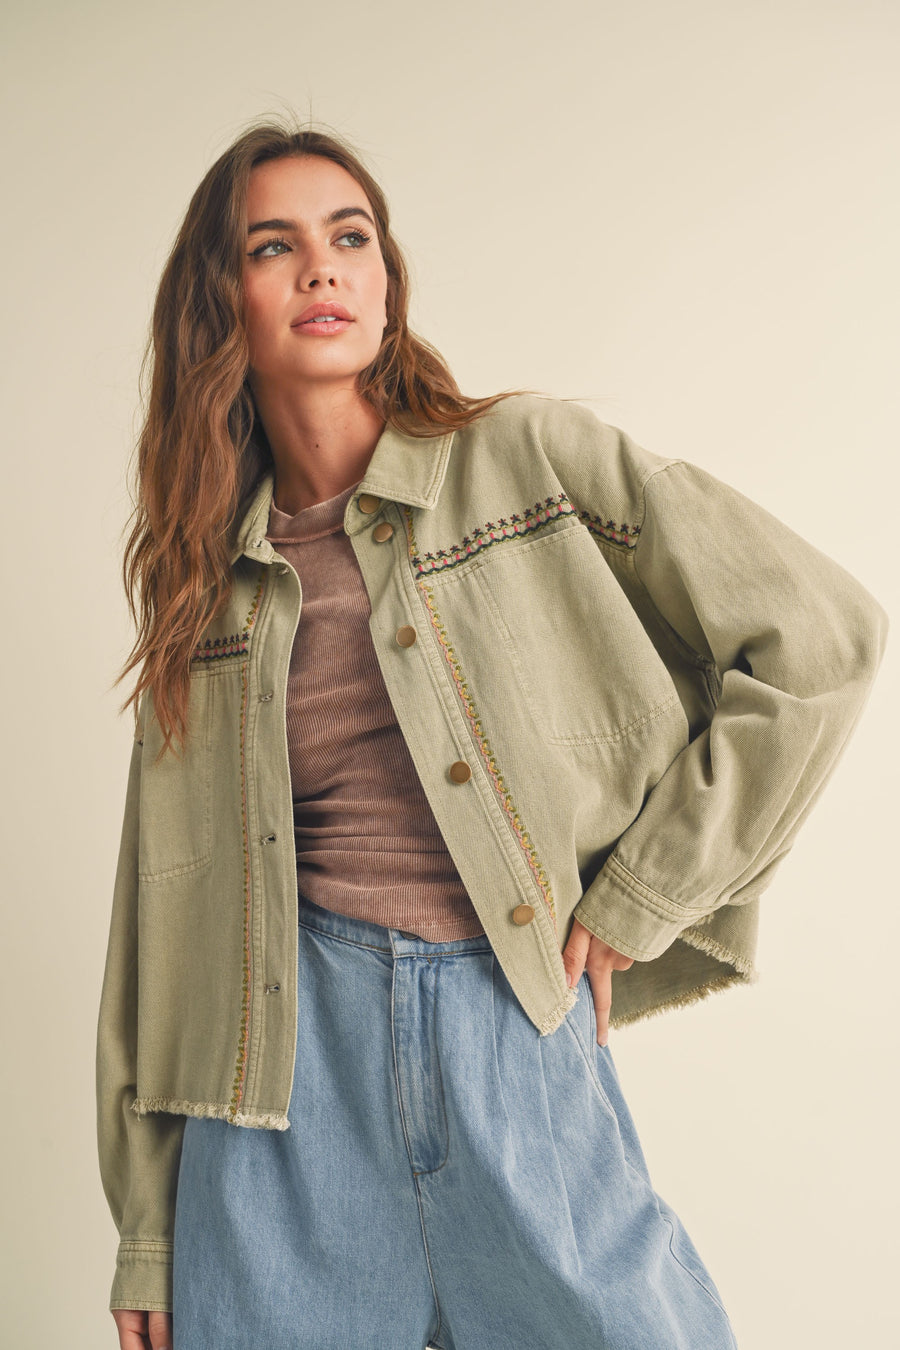 Featuring a cropped jacket with a frayed hem and colorful sitching on the front and back in the shade washed olive 